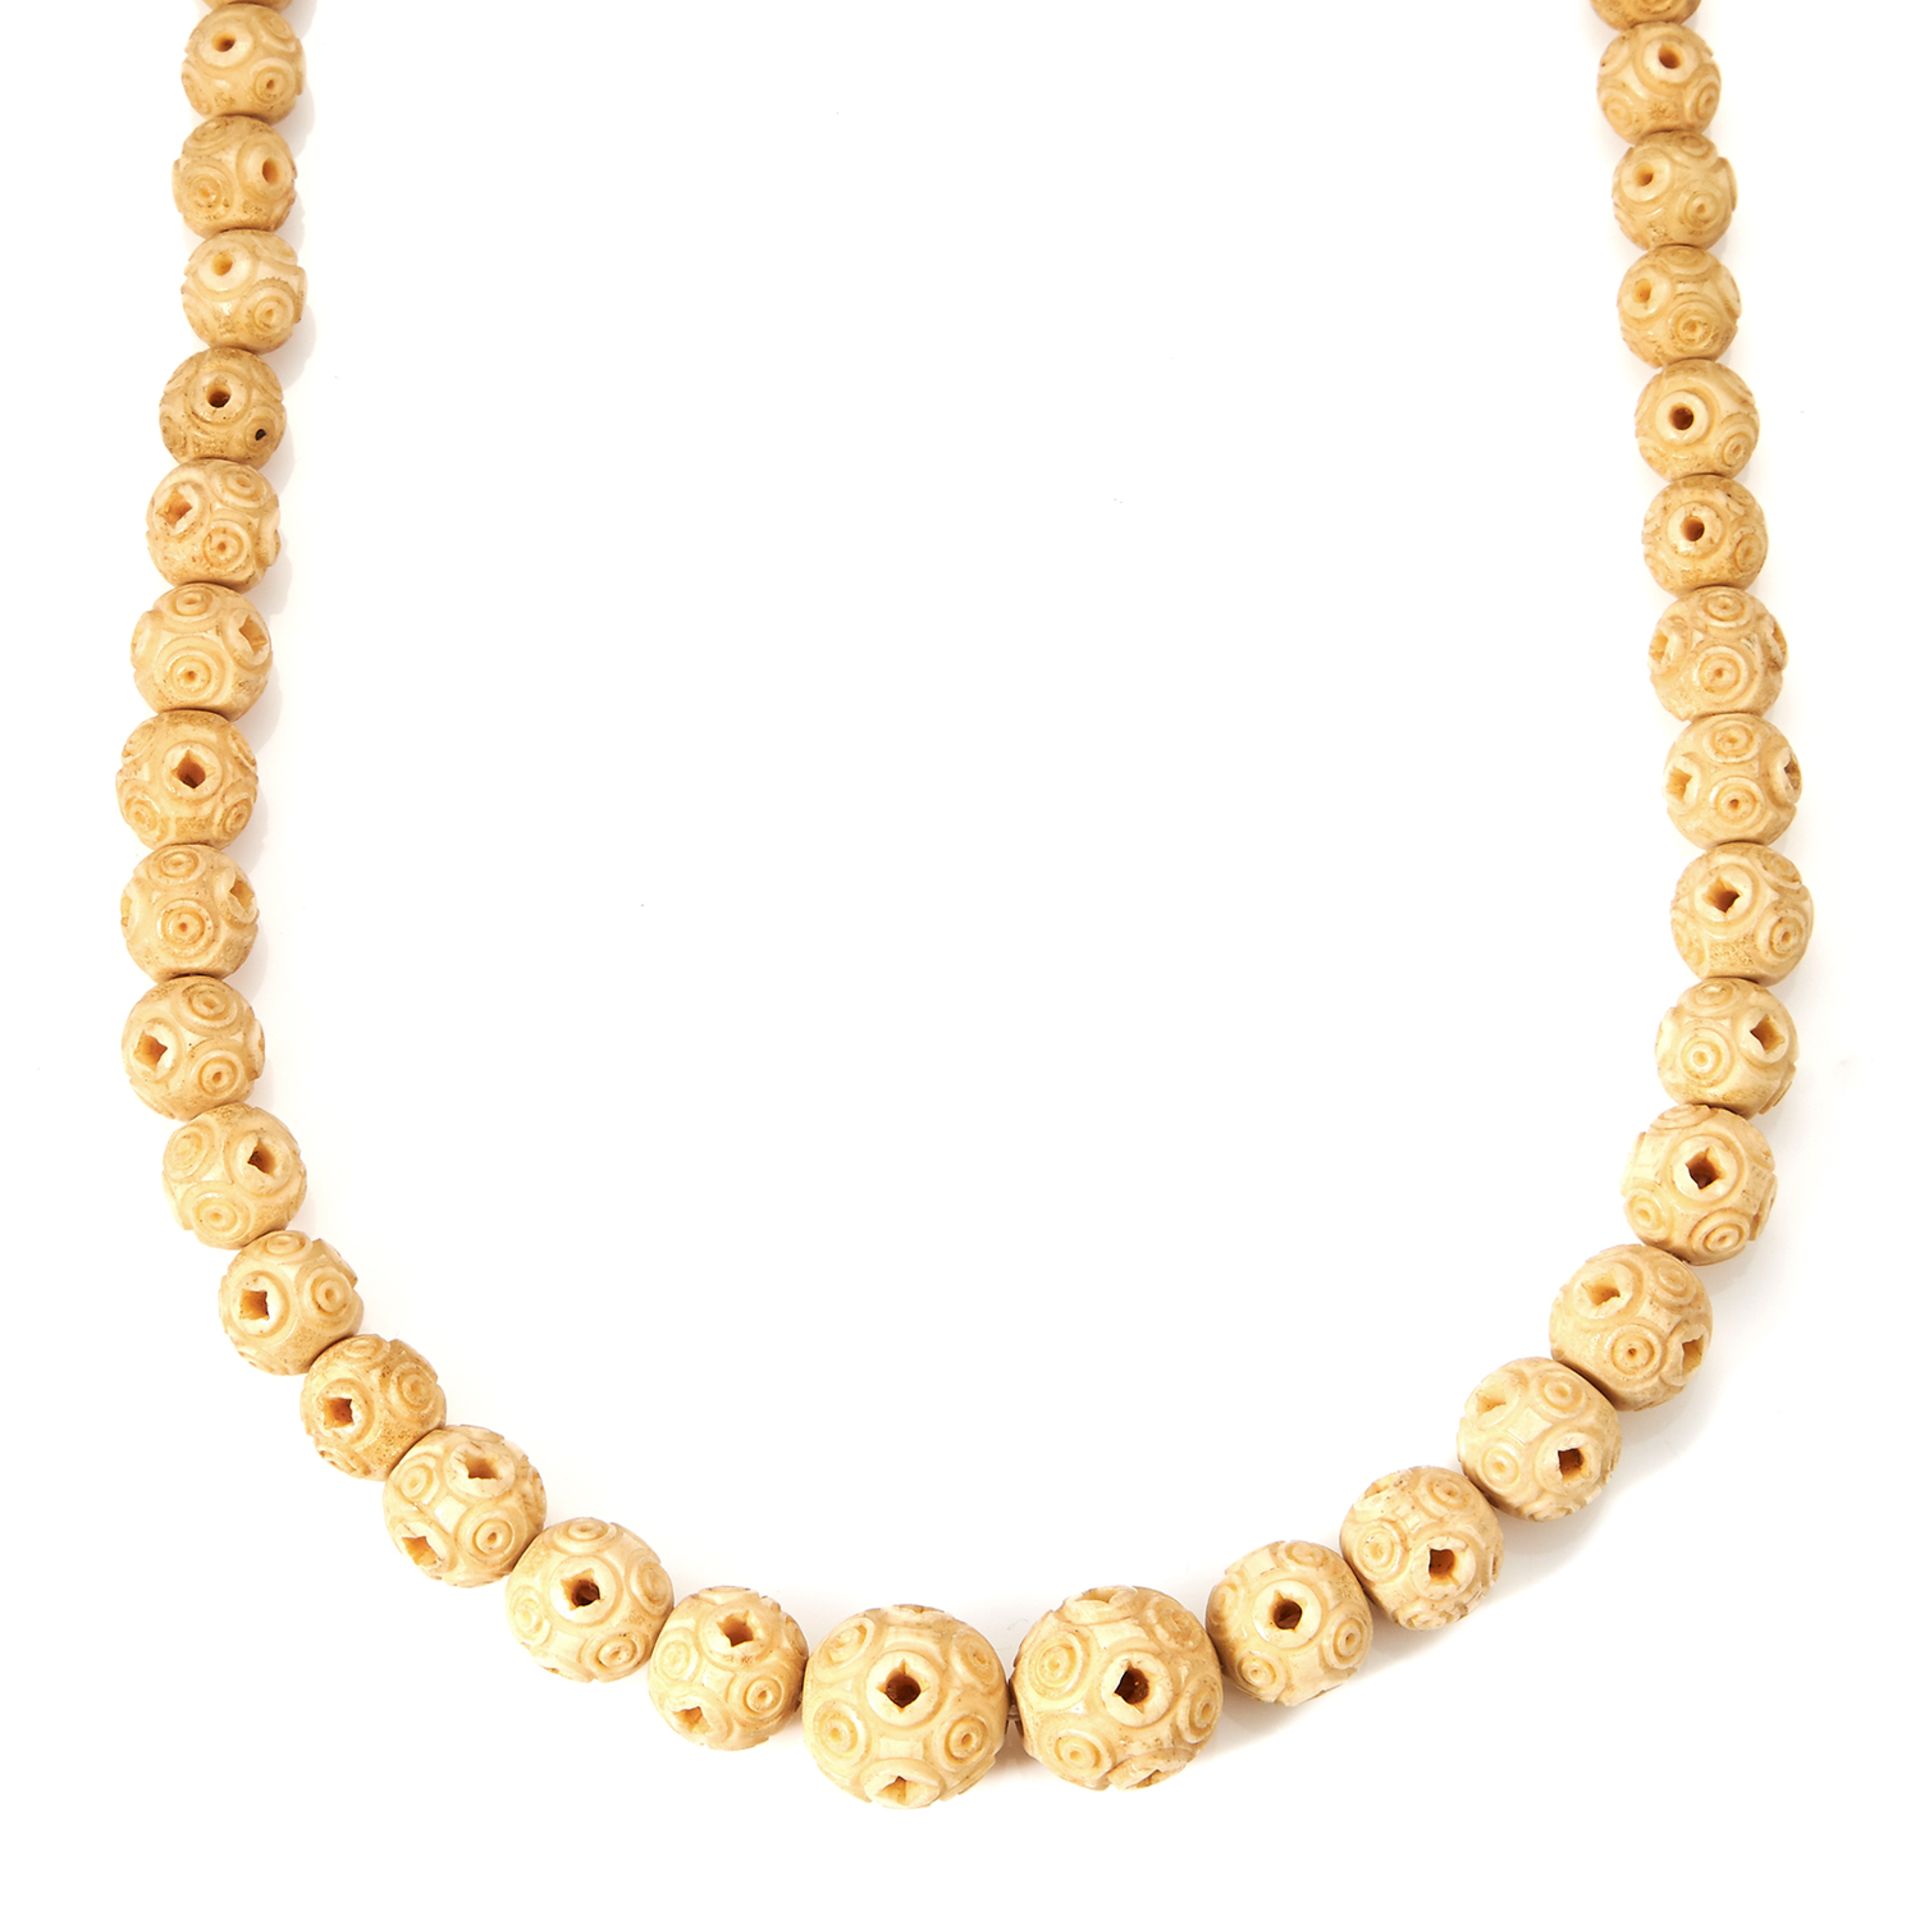 AN ANTIQUE CHINESE CARVED BONE BEAD NECKLACE together with a quantity of other antique carved bone